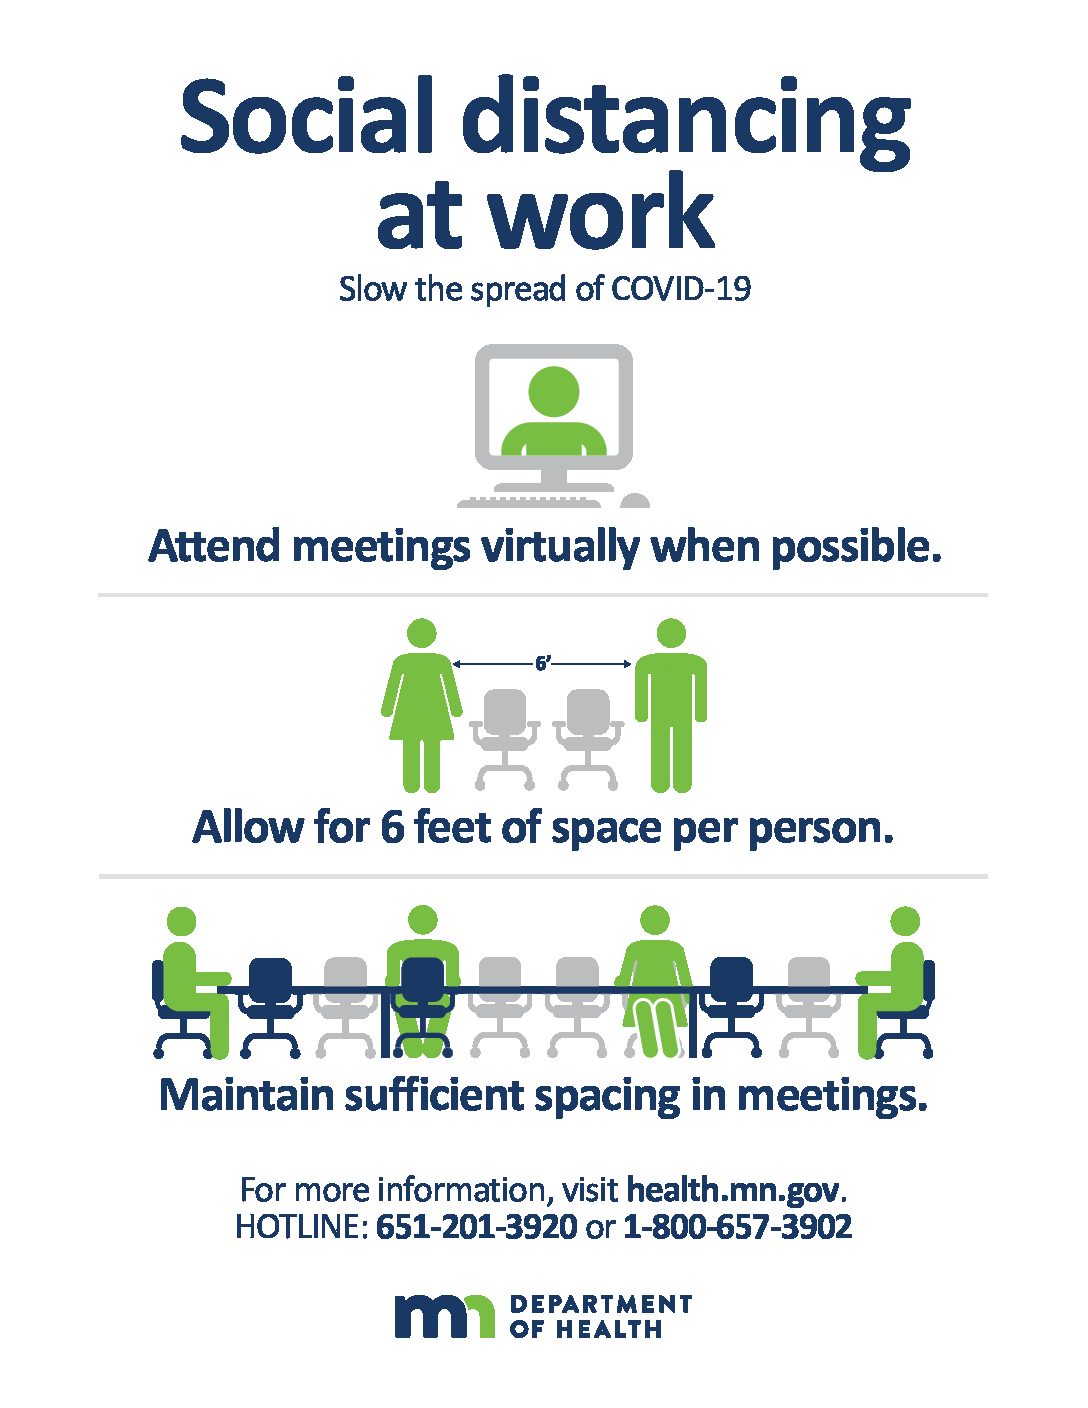 Social Distancing at Work (The Minnesota Department of Health)